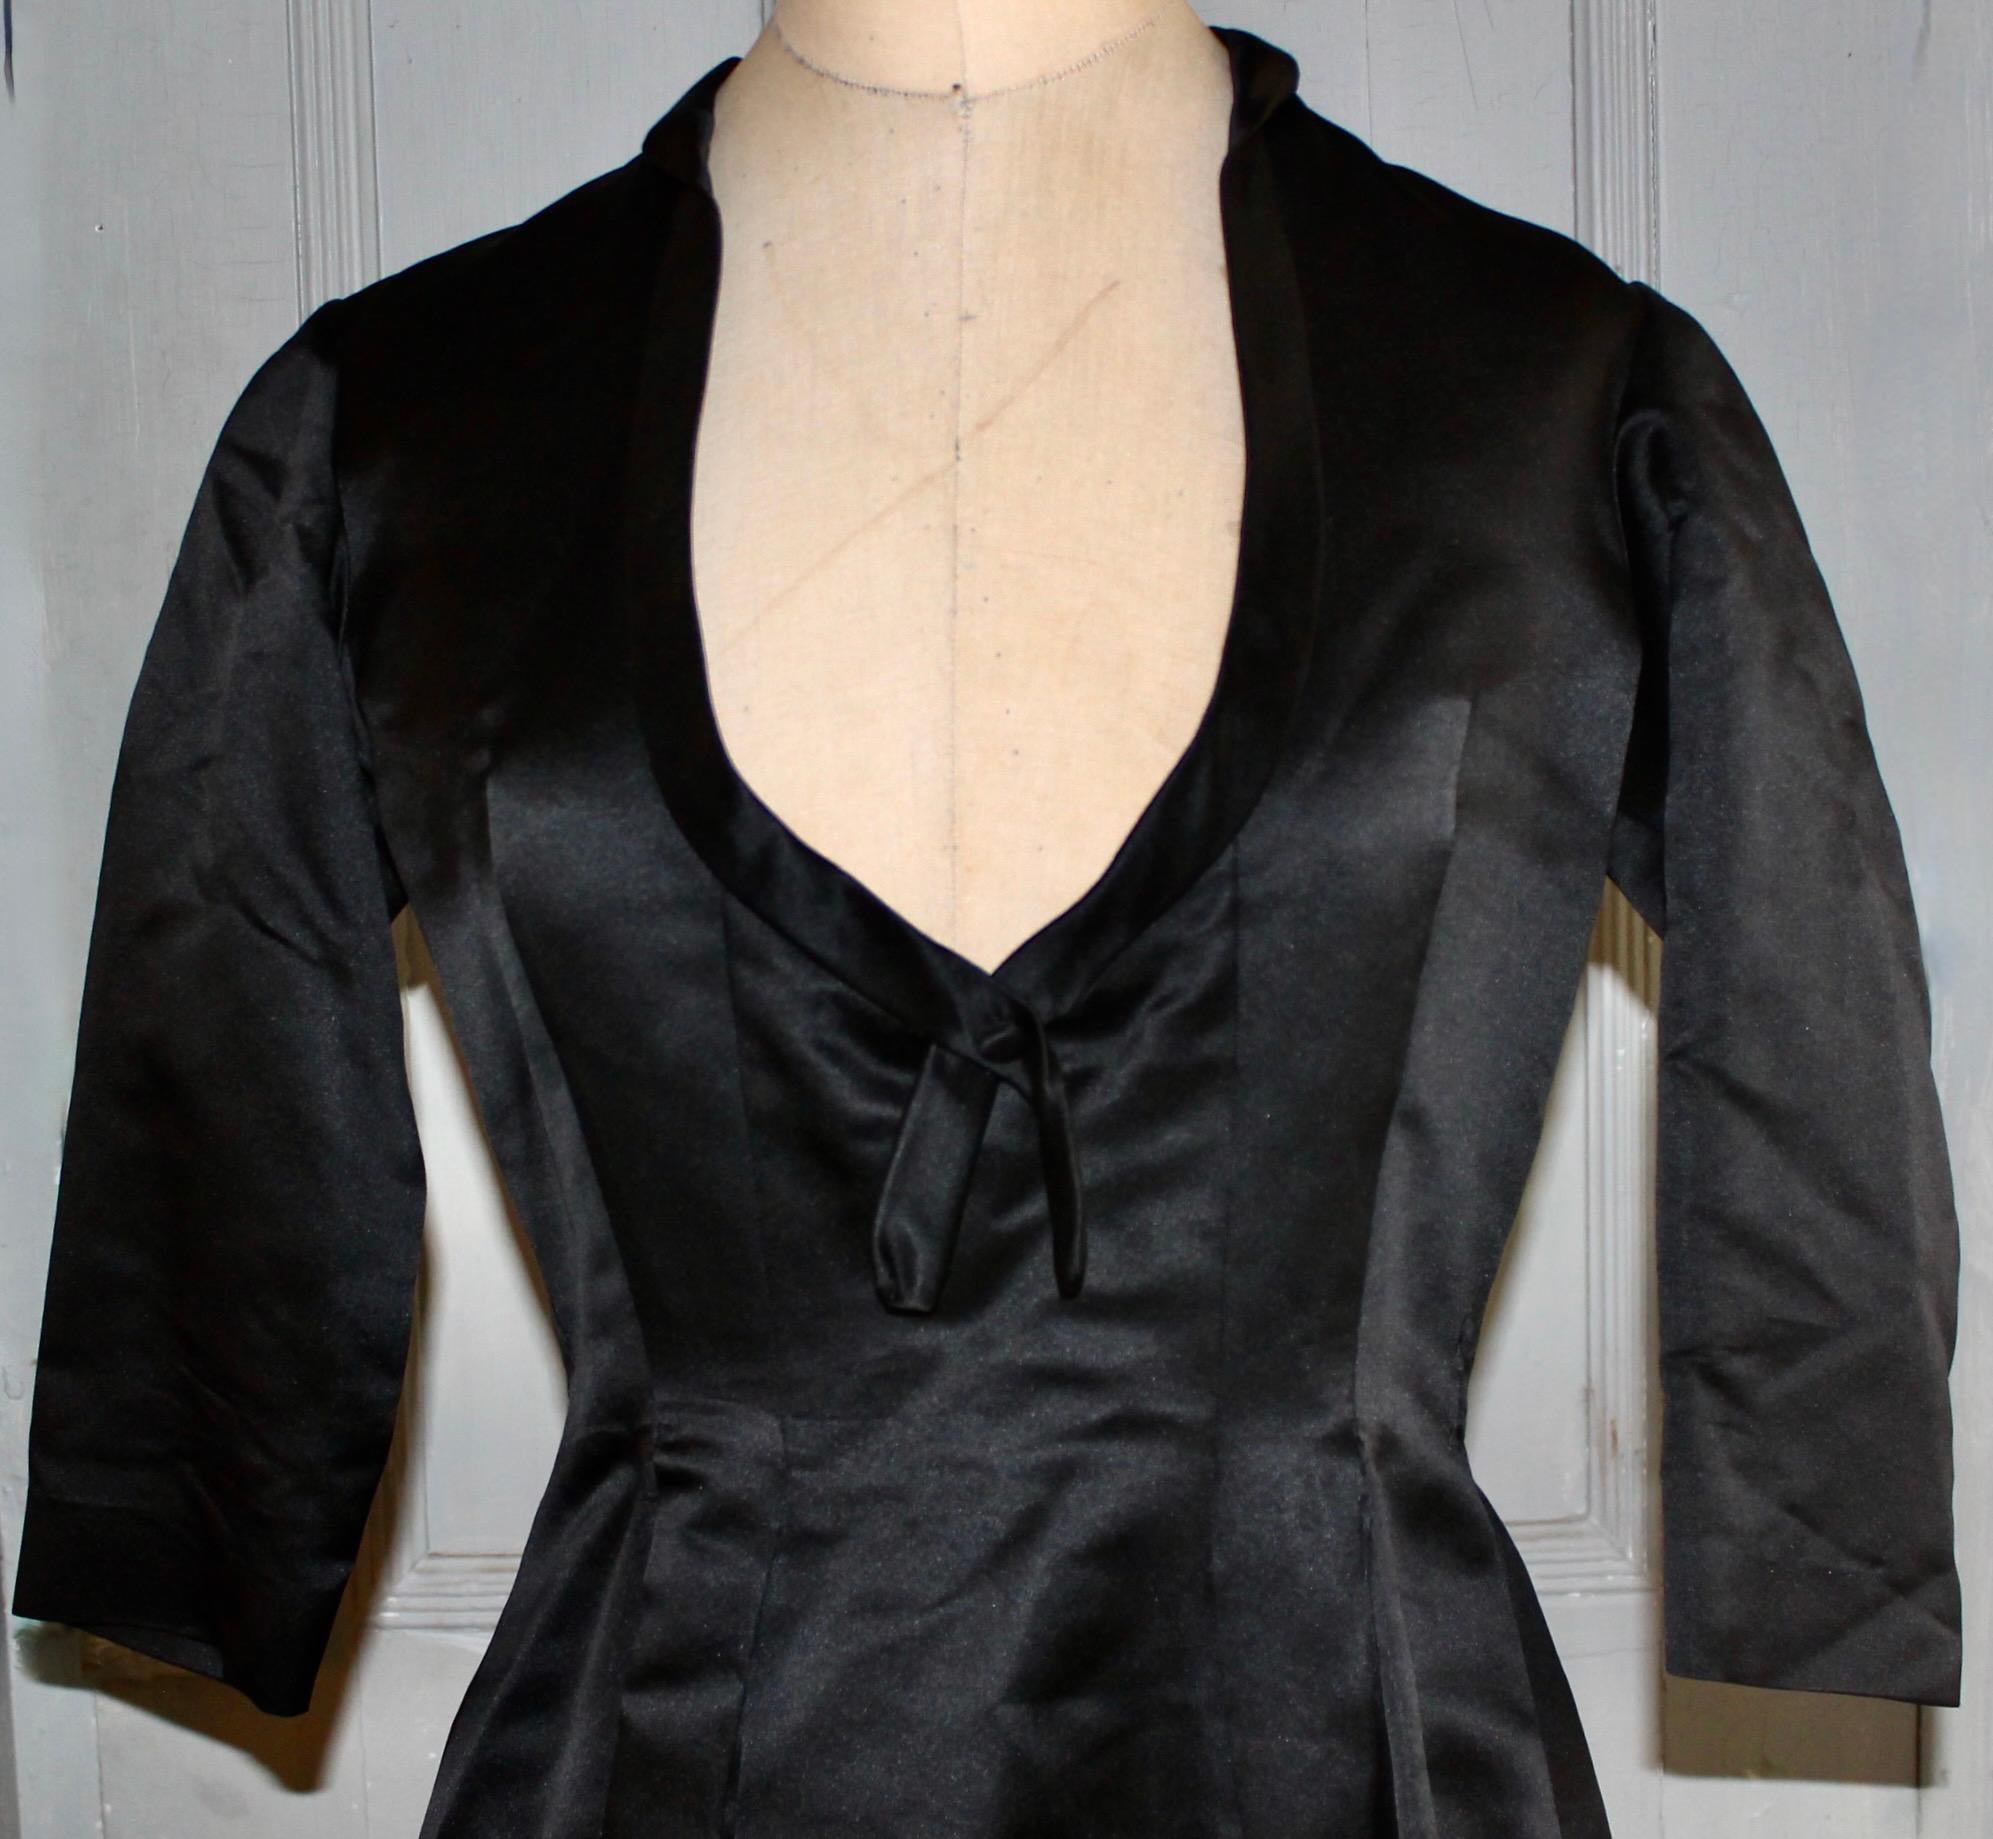 A Christian Dior-New York (founded in 1948) black silk/satin evening dress. Bearing a Christian Dior Original made in USA Christian Dior-New York Label, (50's labels) and a Nan Duskin Philadelphia label. Approximate size 6-8 American.